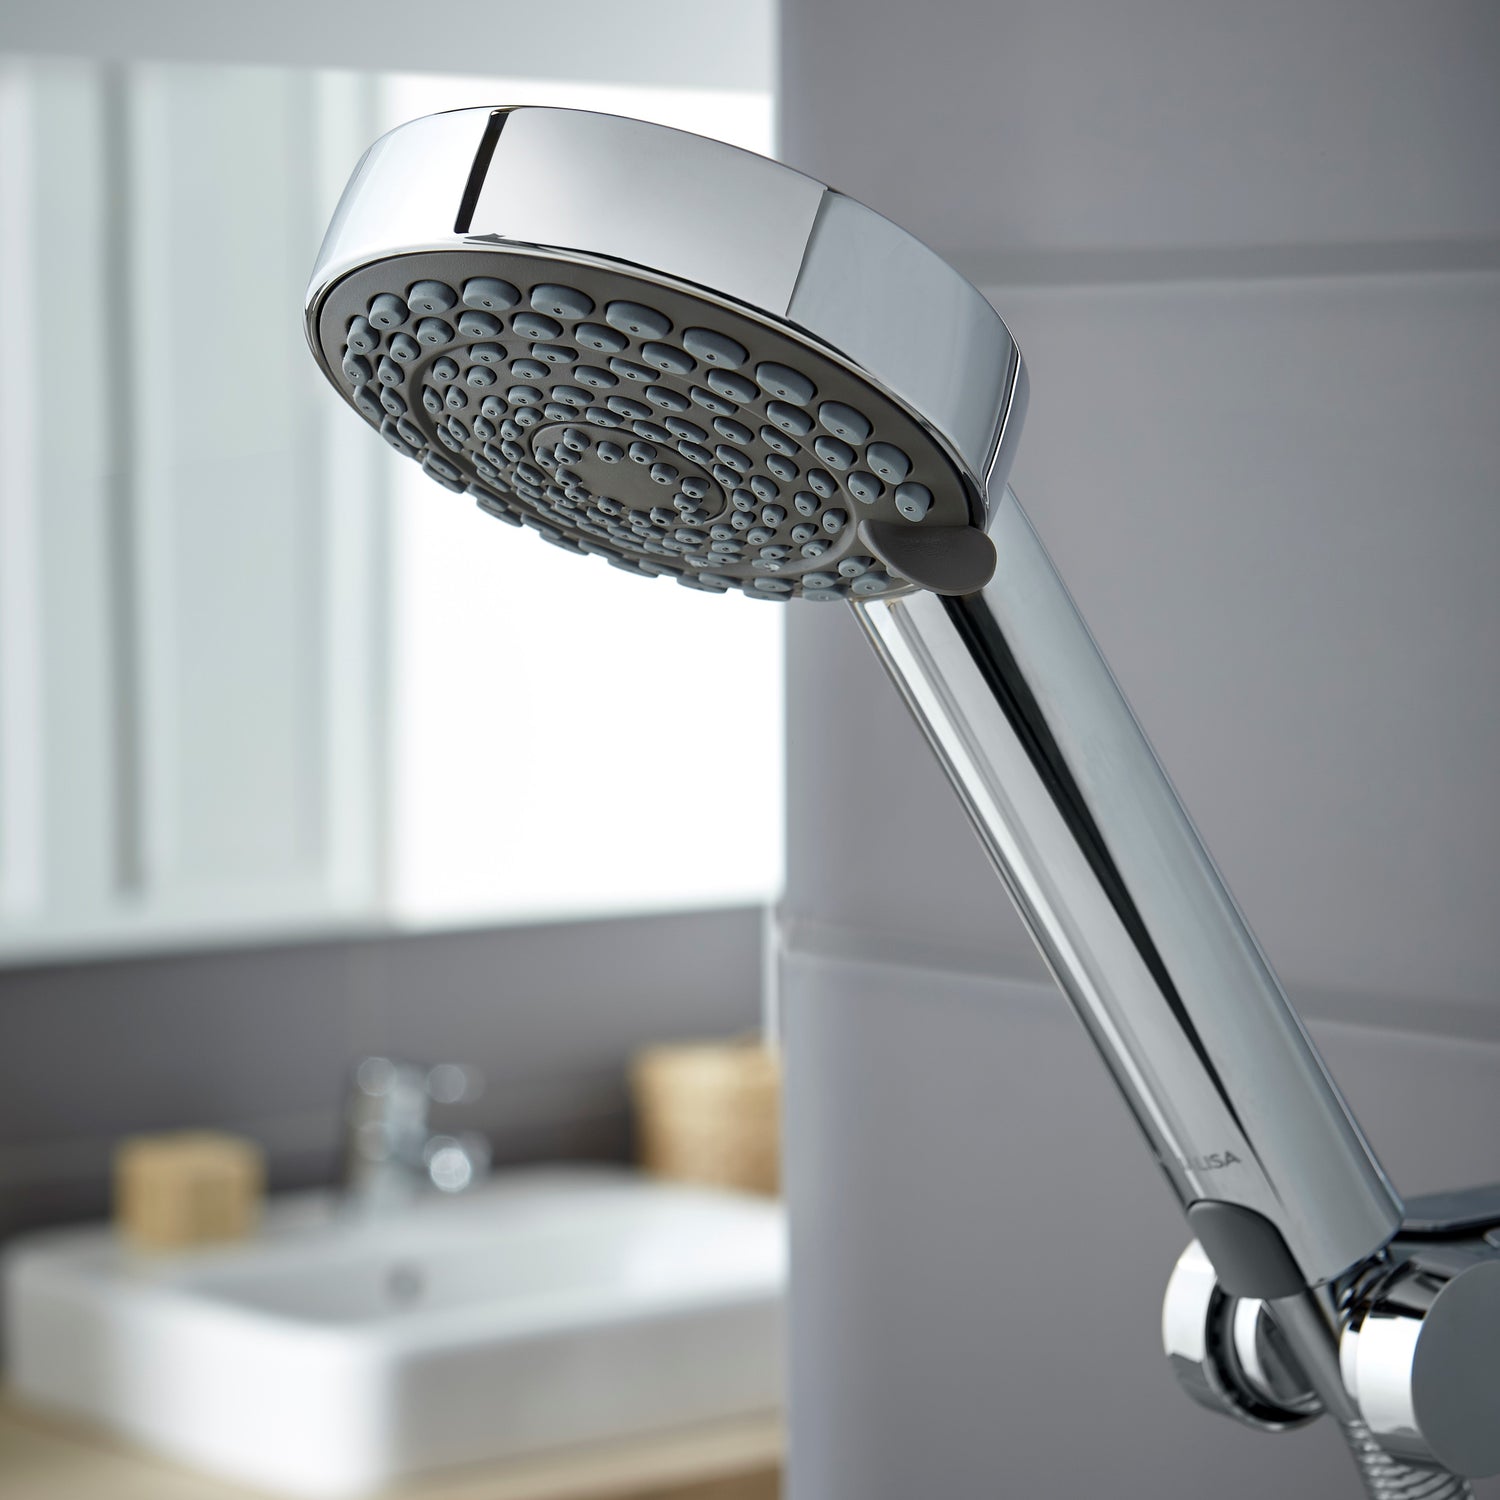 Aqualisa Lumi Electric 9.5Kw Shower With Adjustable Head against grey wall panels LME9501